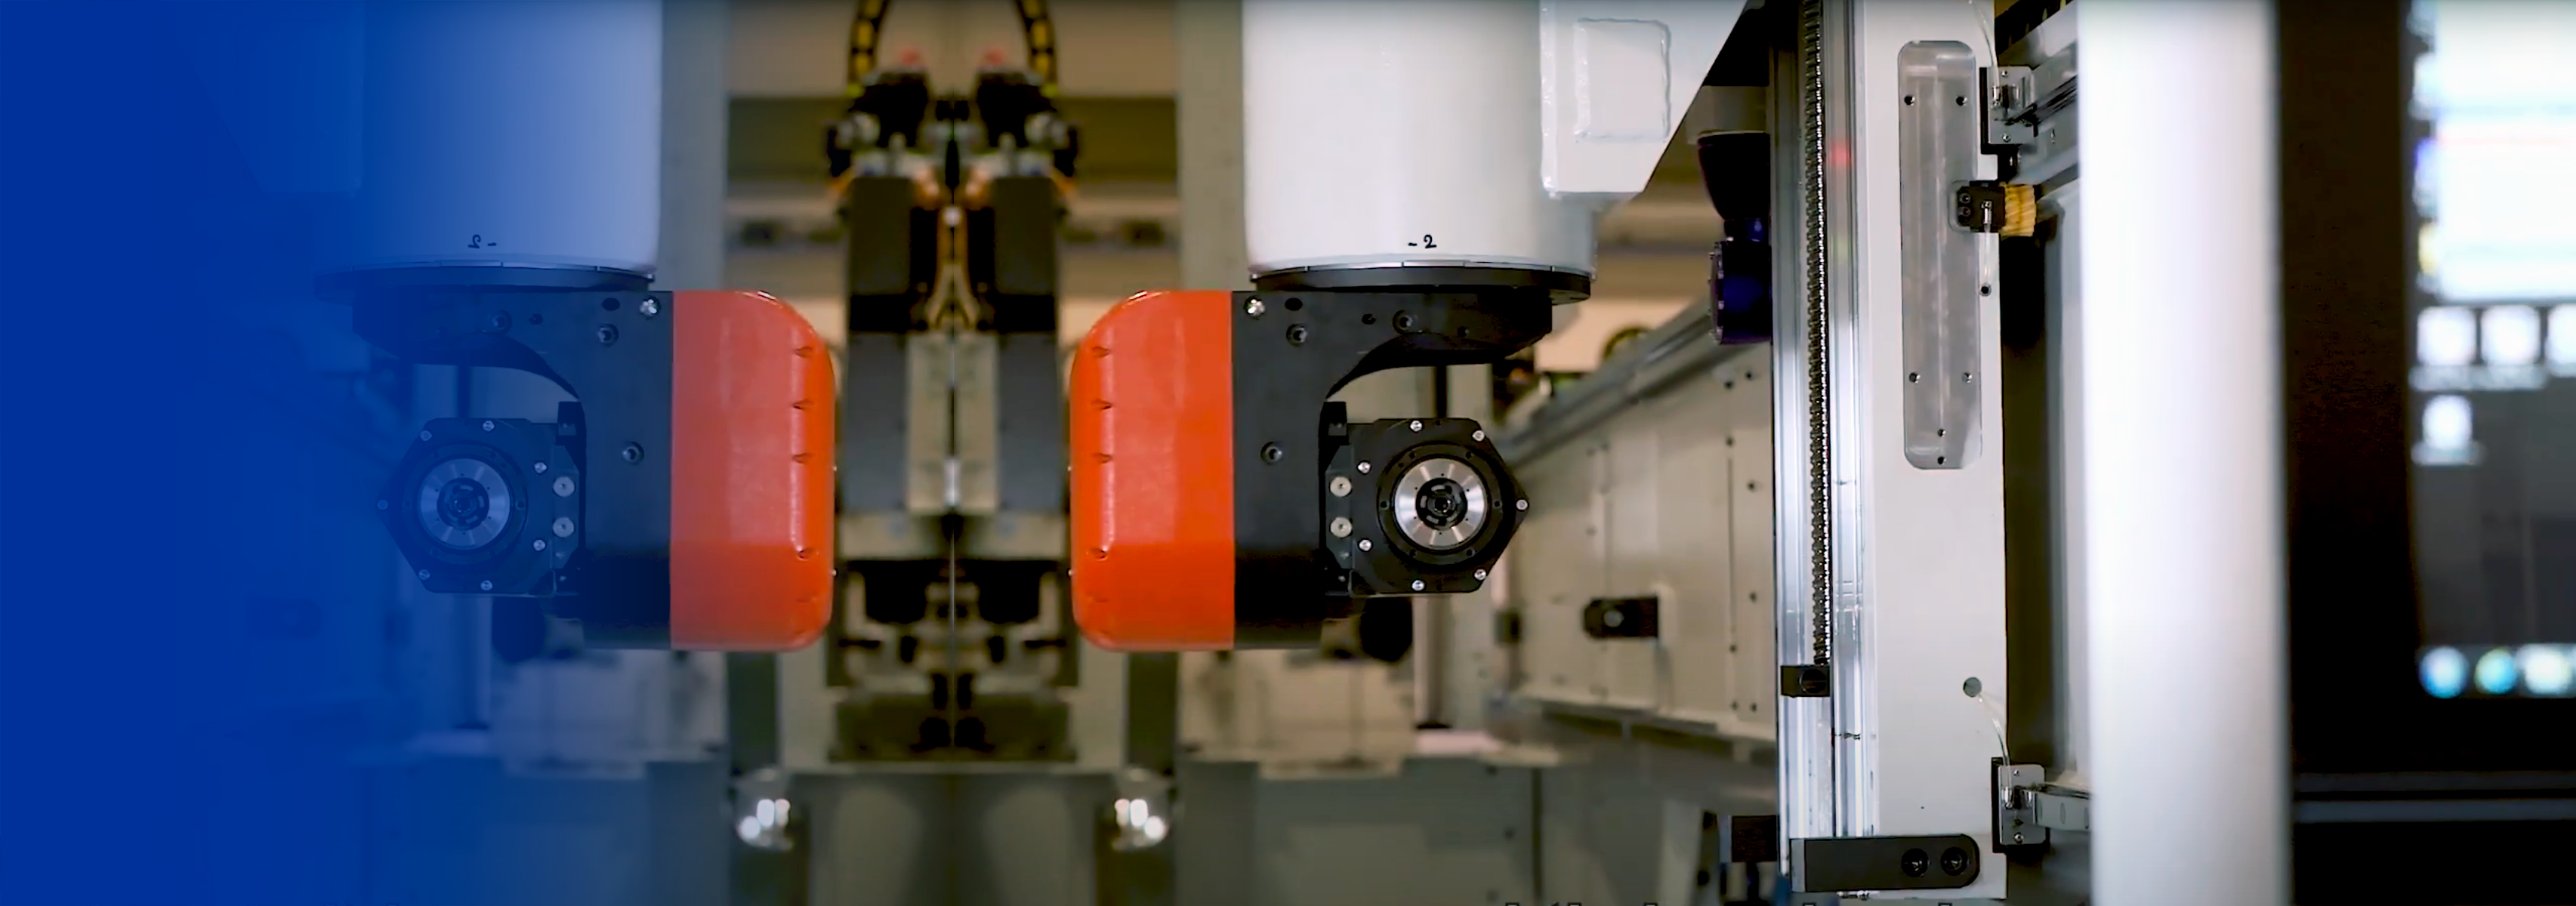 HSD and Working Process: 5-axis Direct Drive technology 